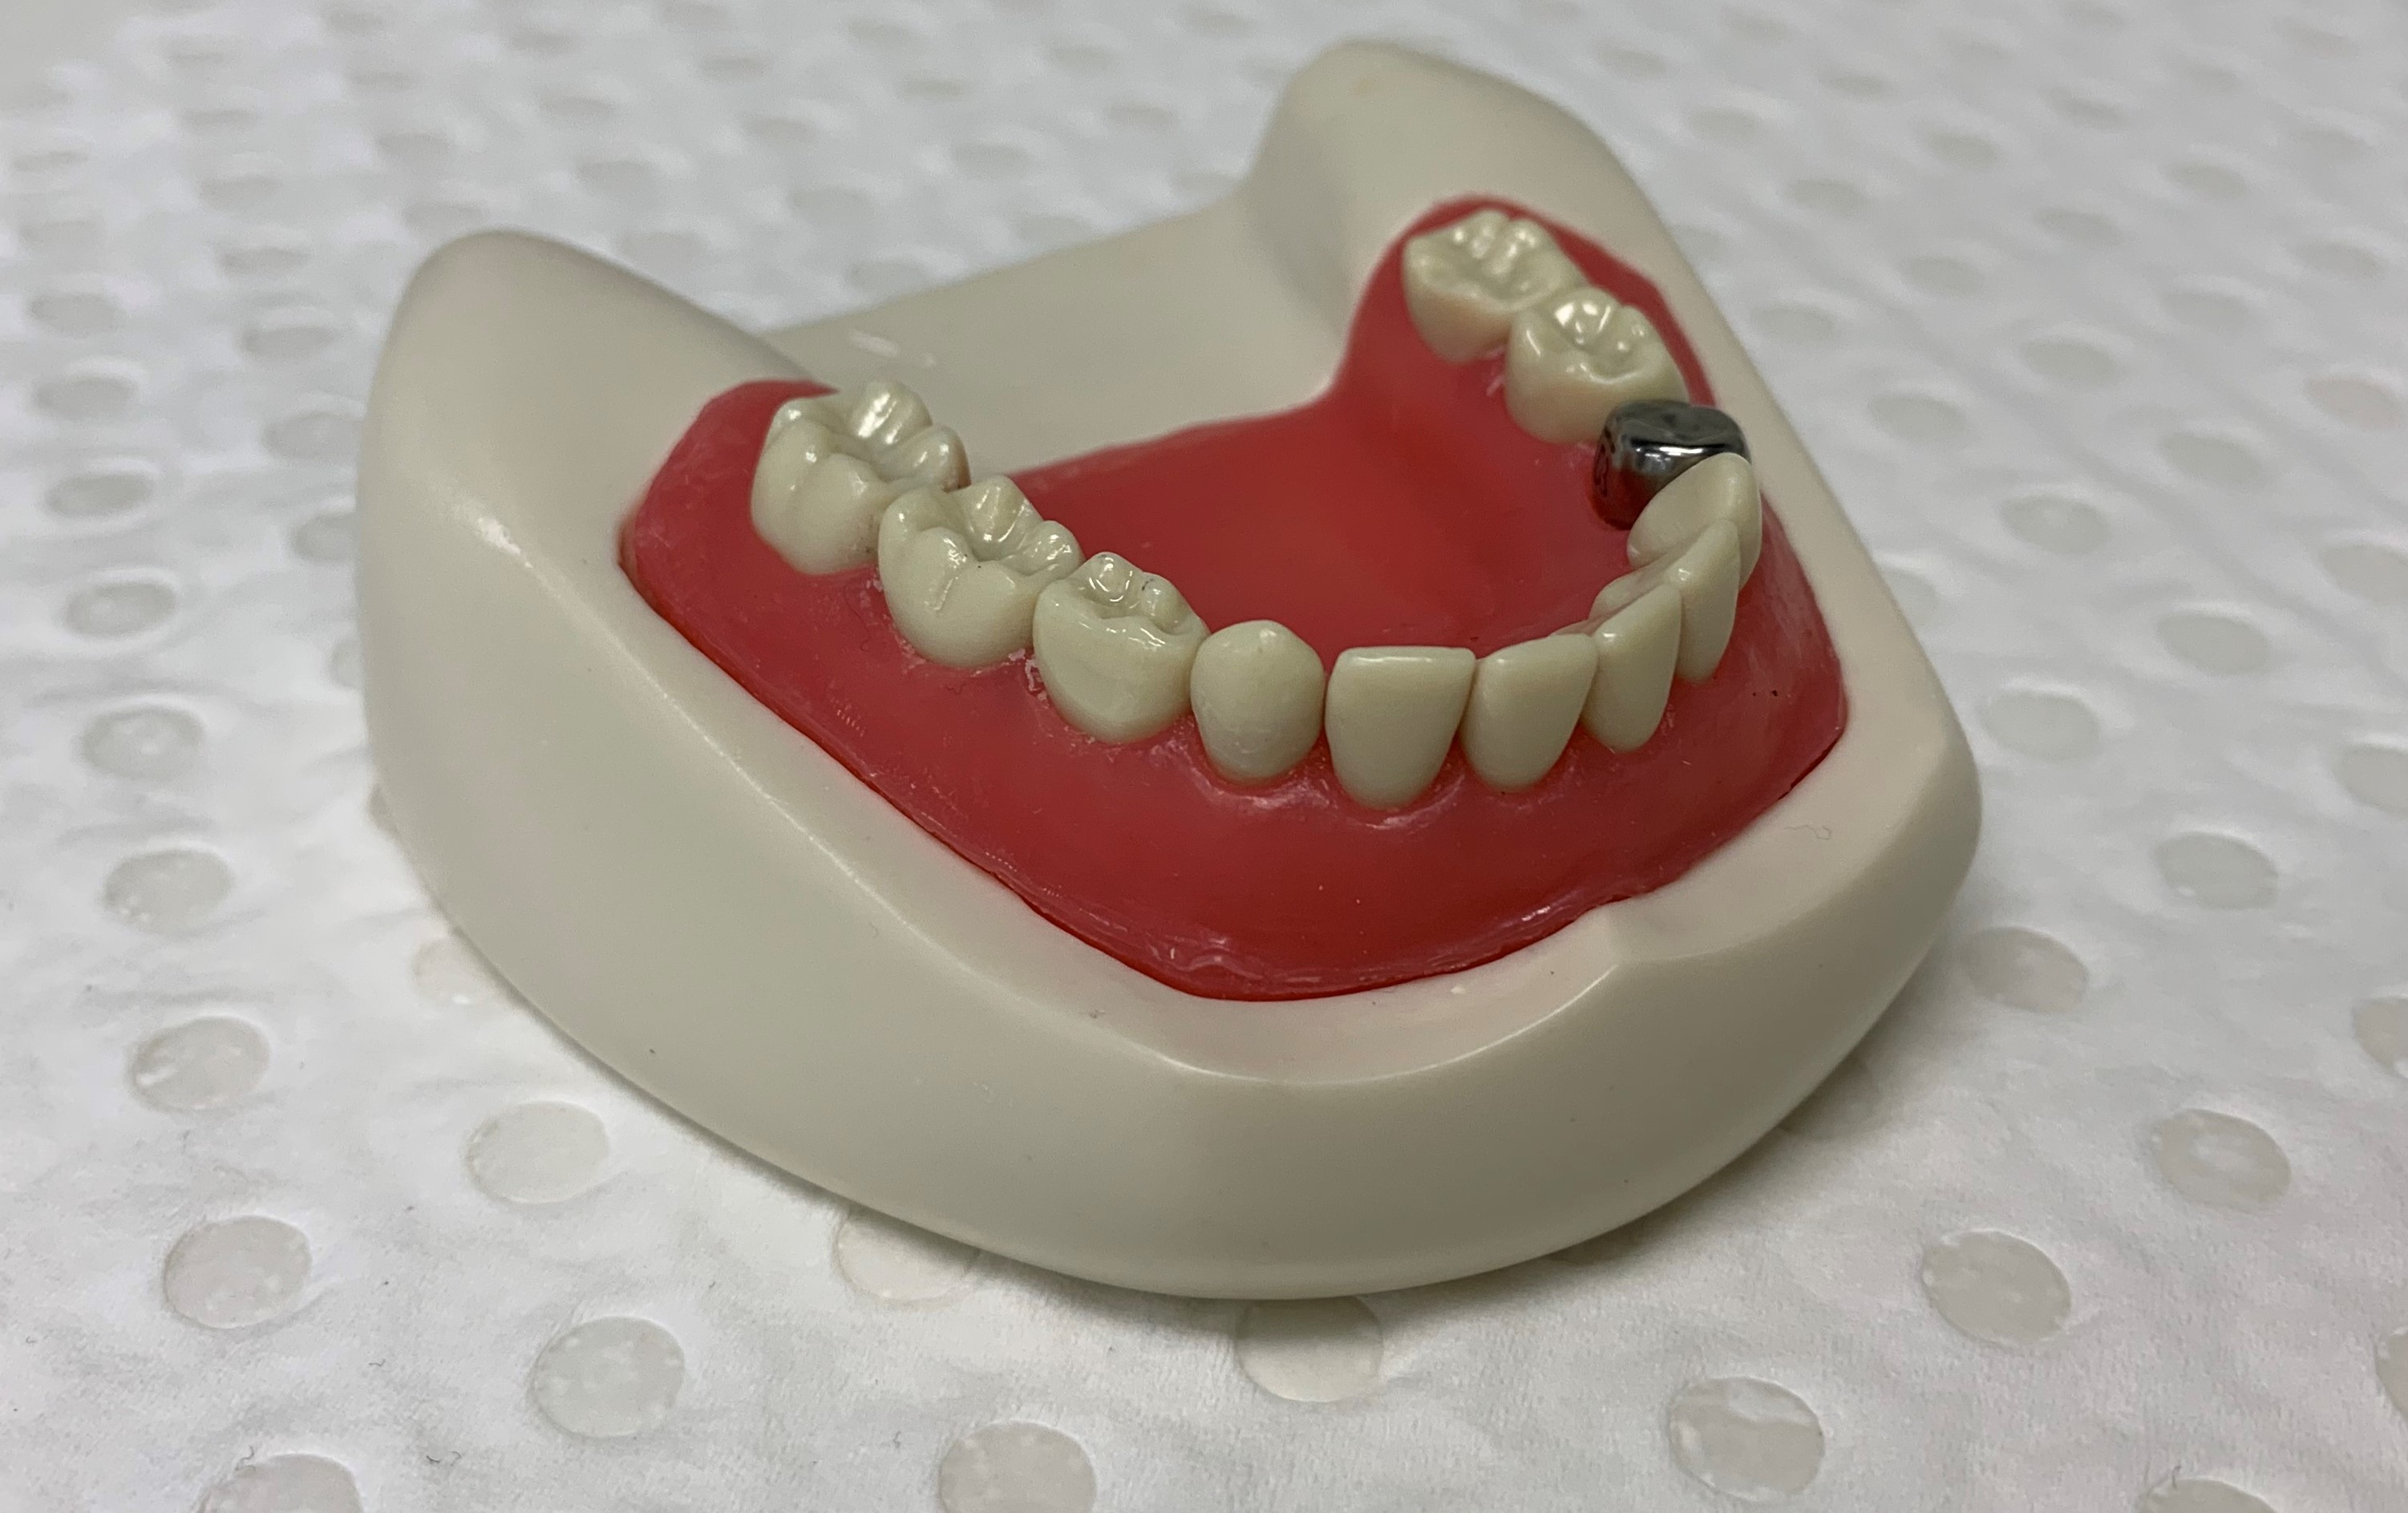 Pre-formed Metal Crowns for paediatric patients